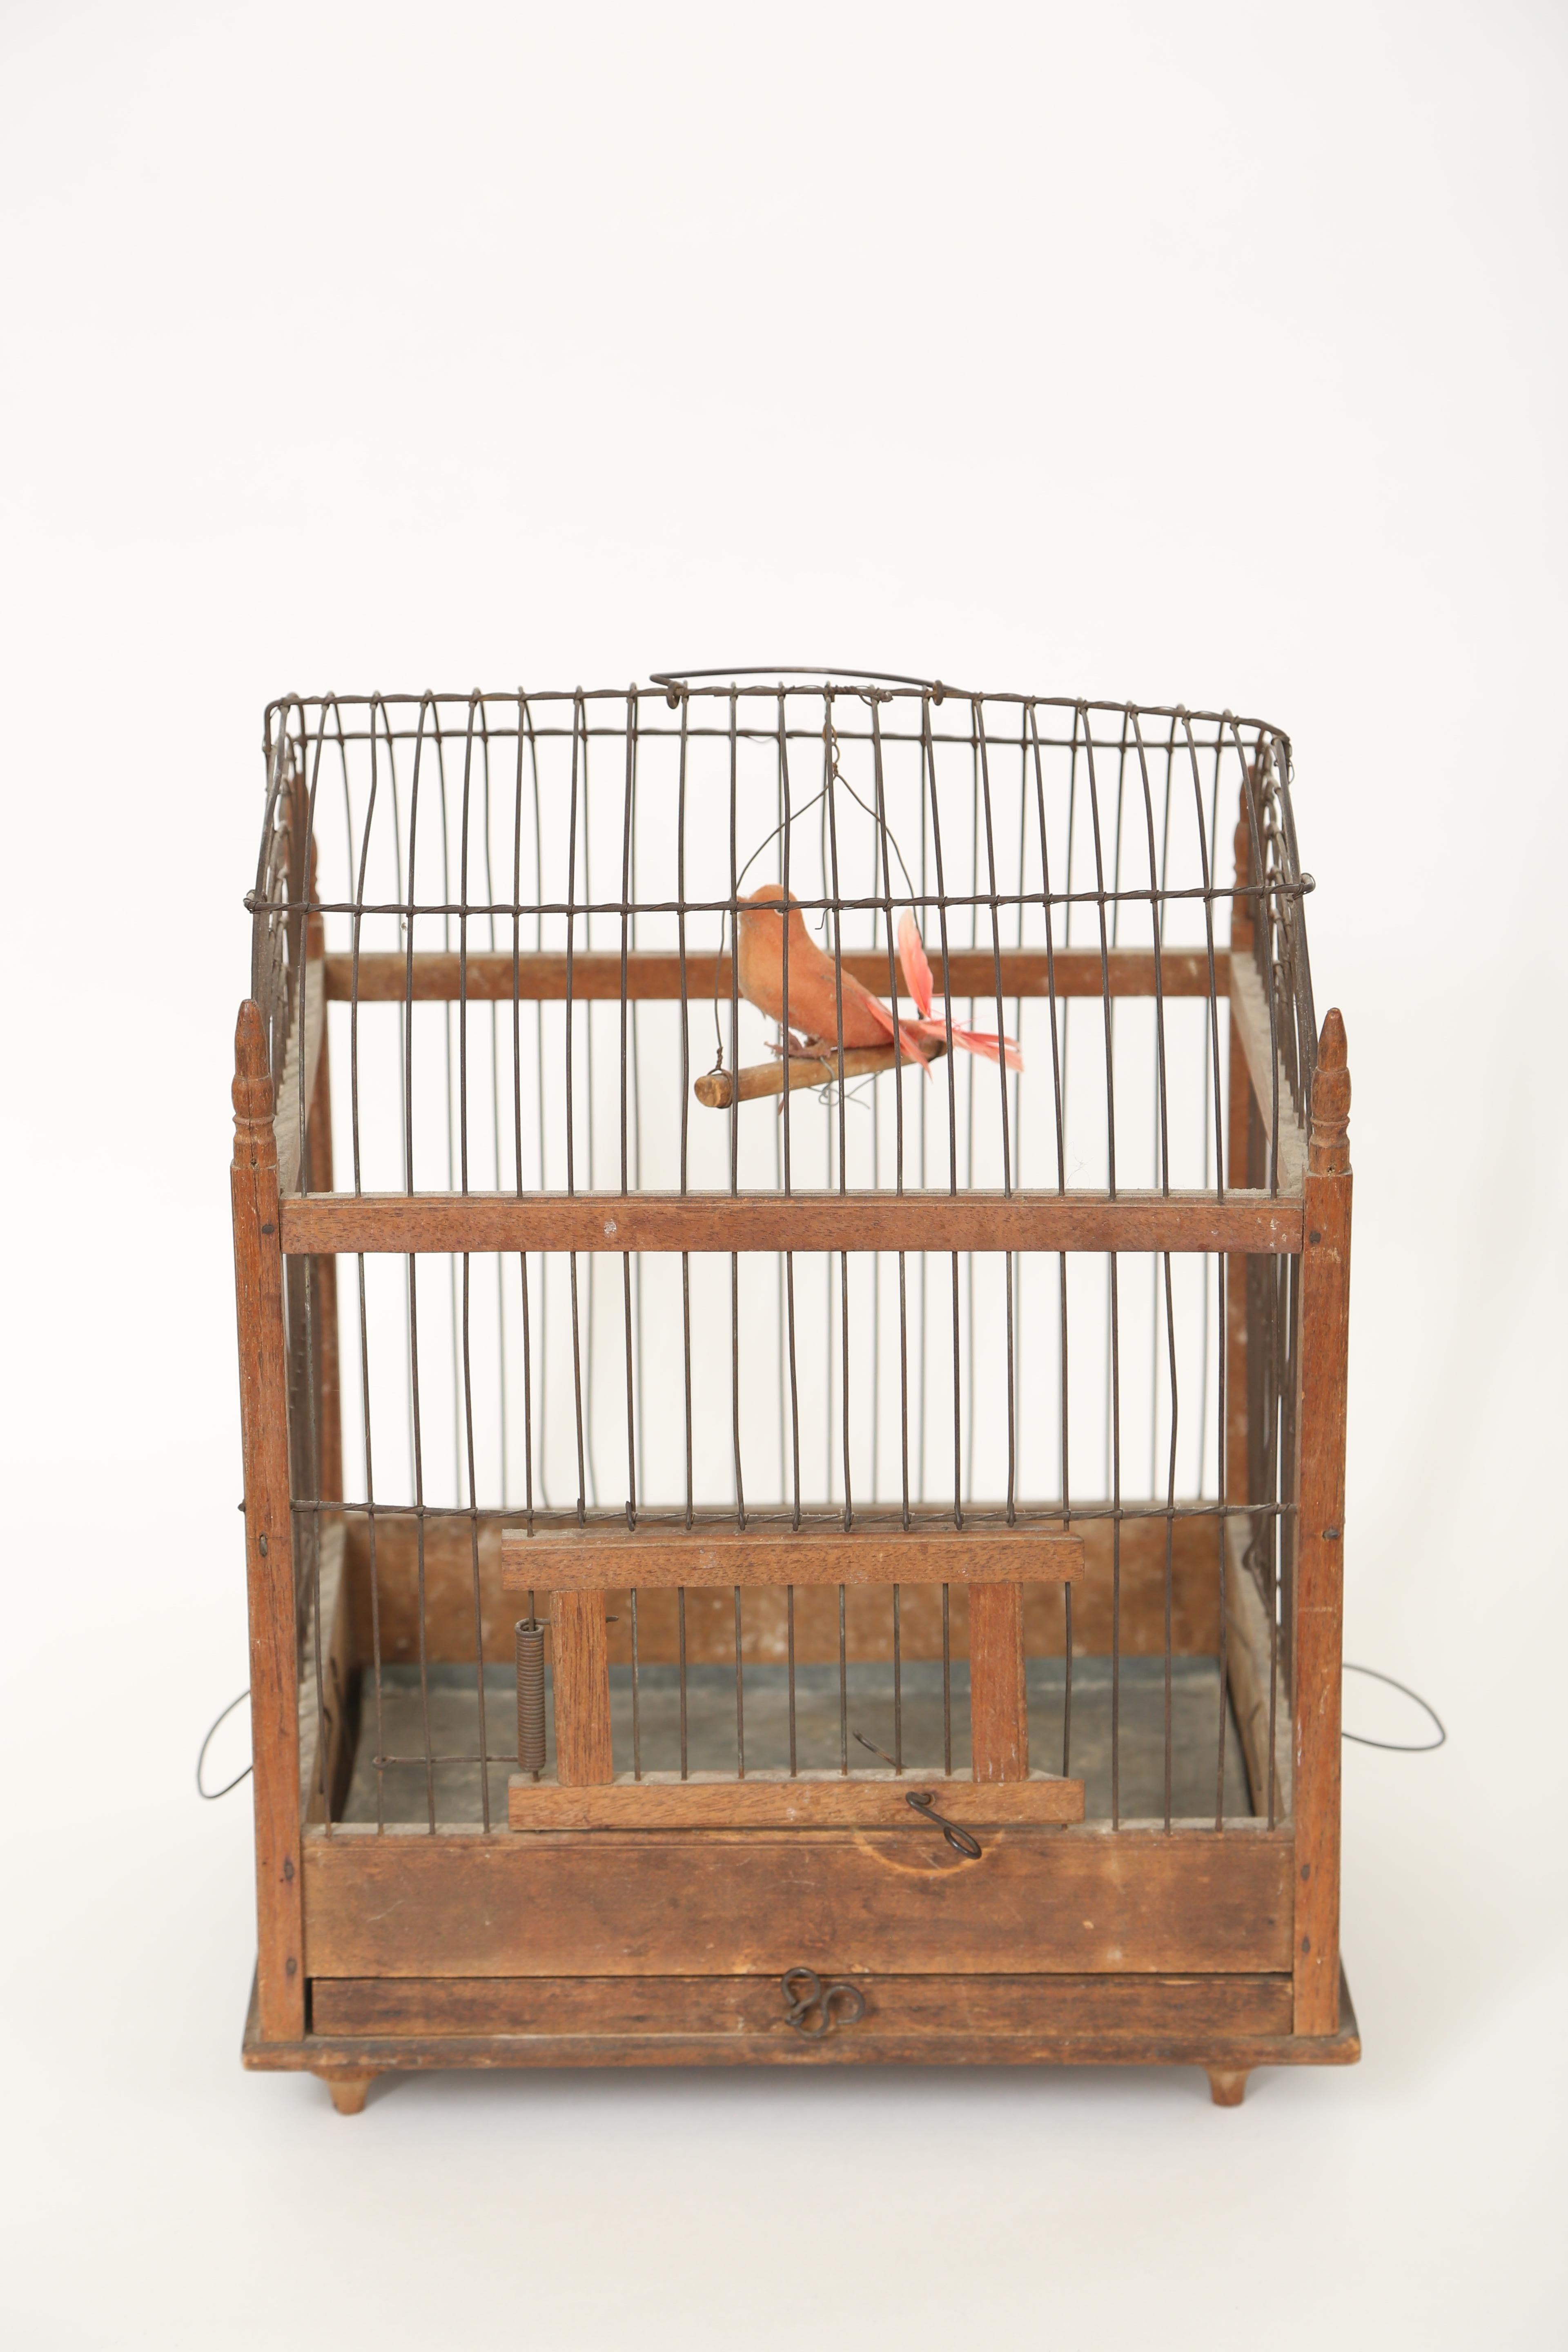 This French country wooden birdcage has charming original appeal. The sides have fan top detail in the wirework. Each corner has a turned finial. The door latches and there is a slide out metal lined tray at the bottom of the cage all of which rests